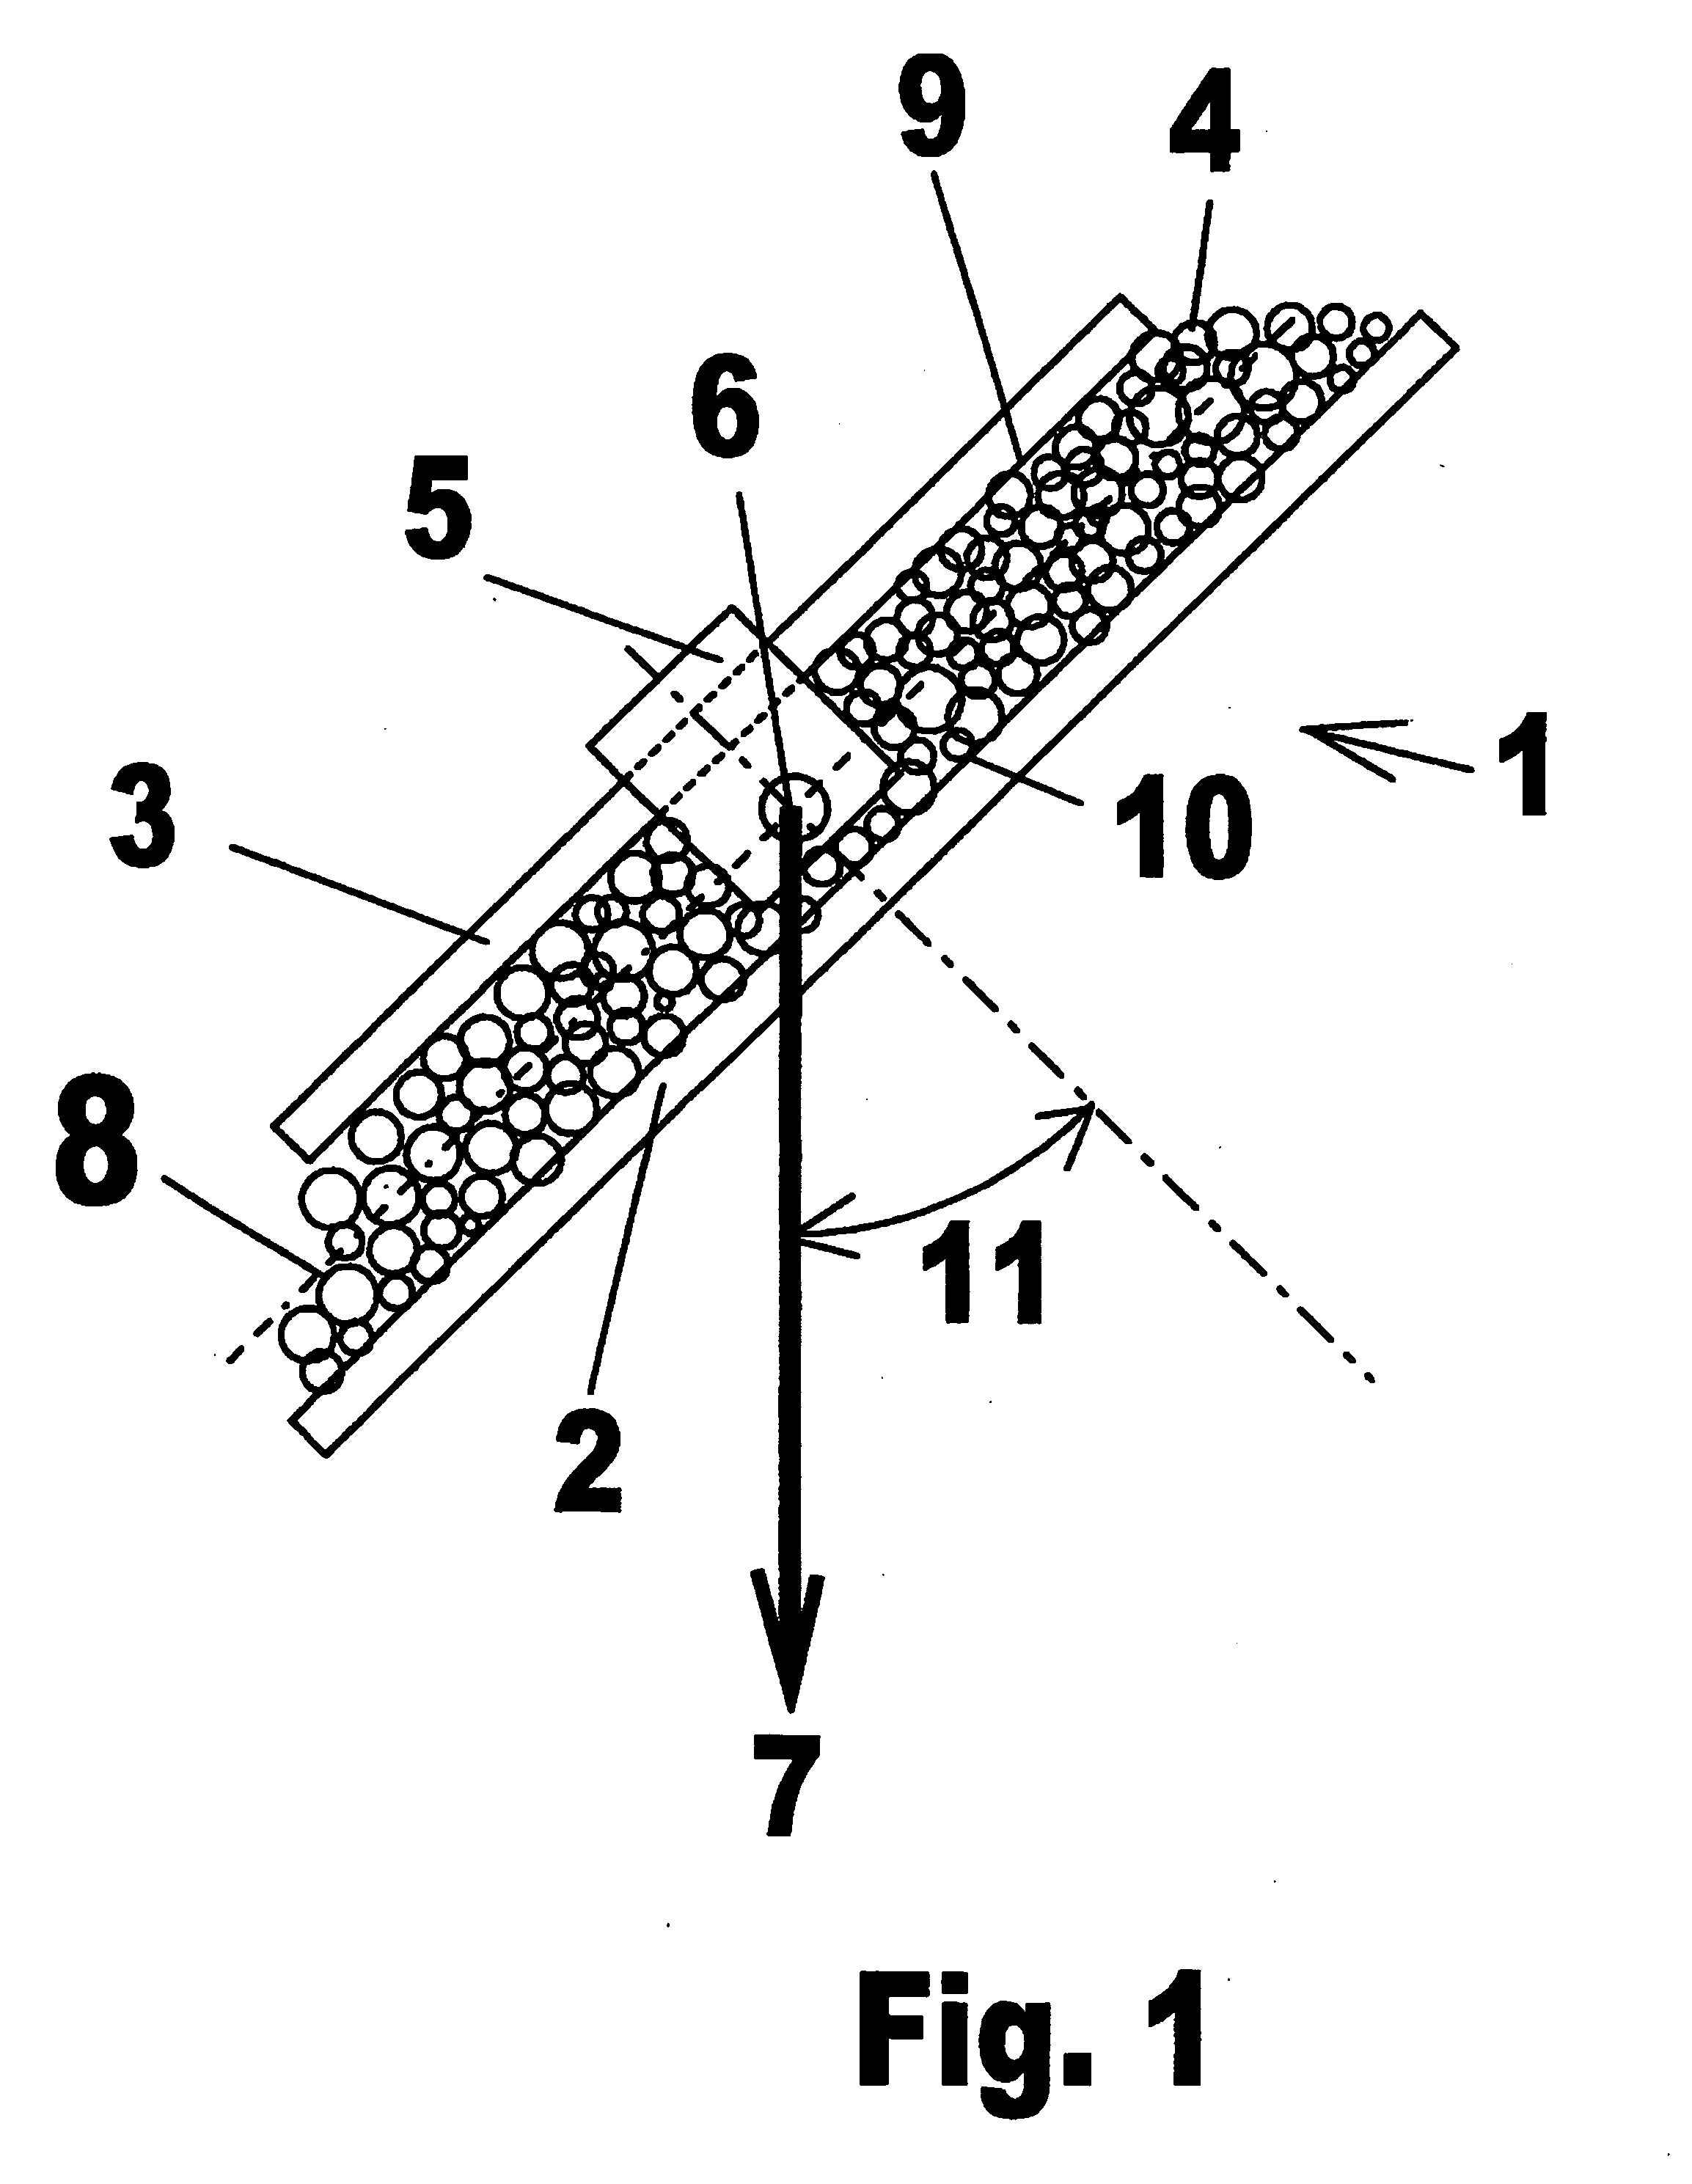 Apparatus and test procedure for measuring the cohesive, adhesive, and frictional properties of bulk granular solids